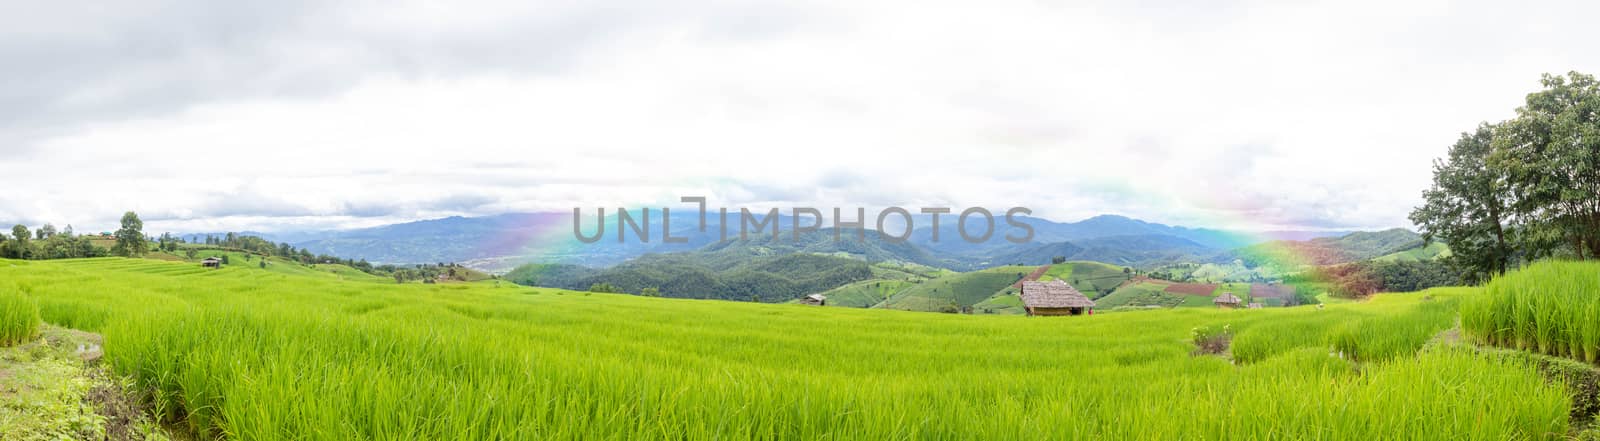 Beautiful Green Rice Field With Blue Sky And Rainbow In The Mountain Background.